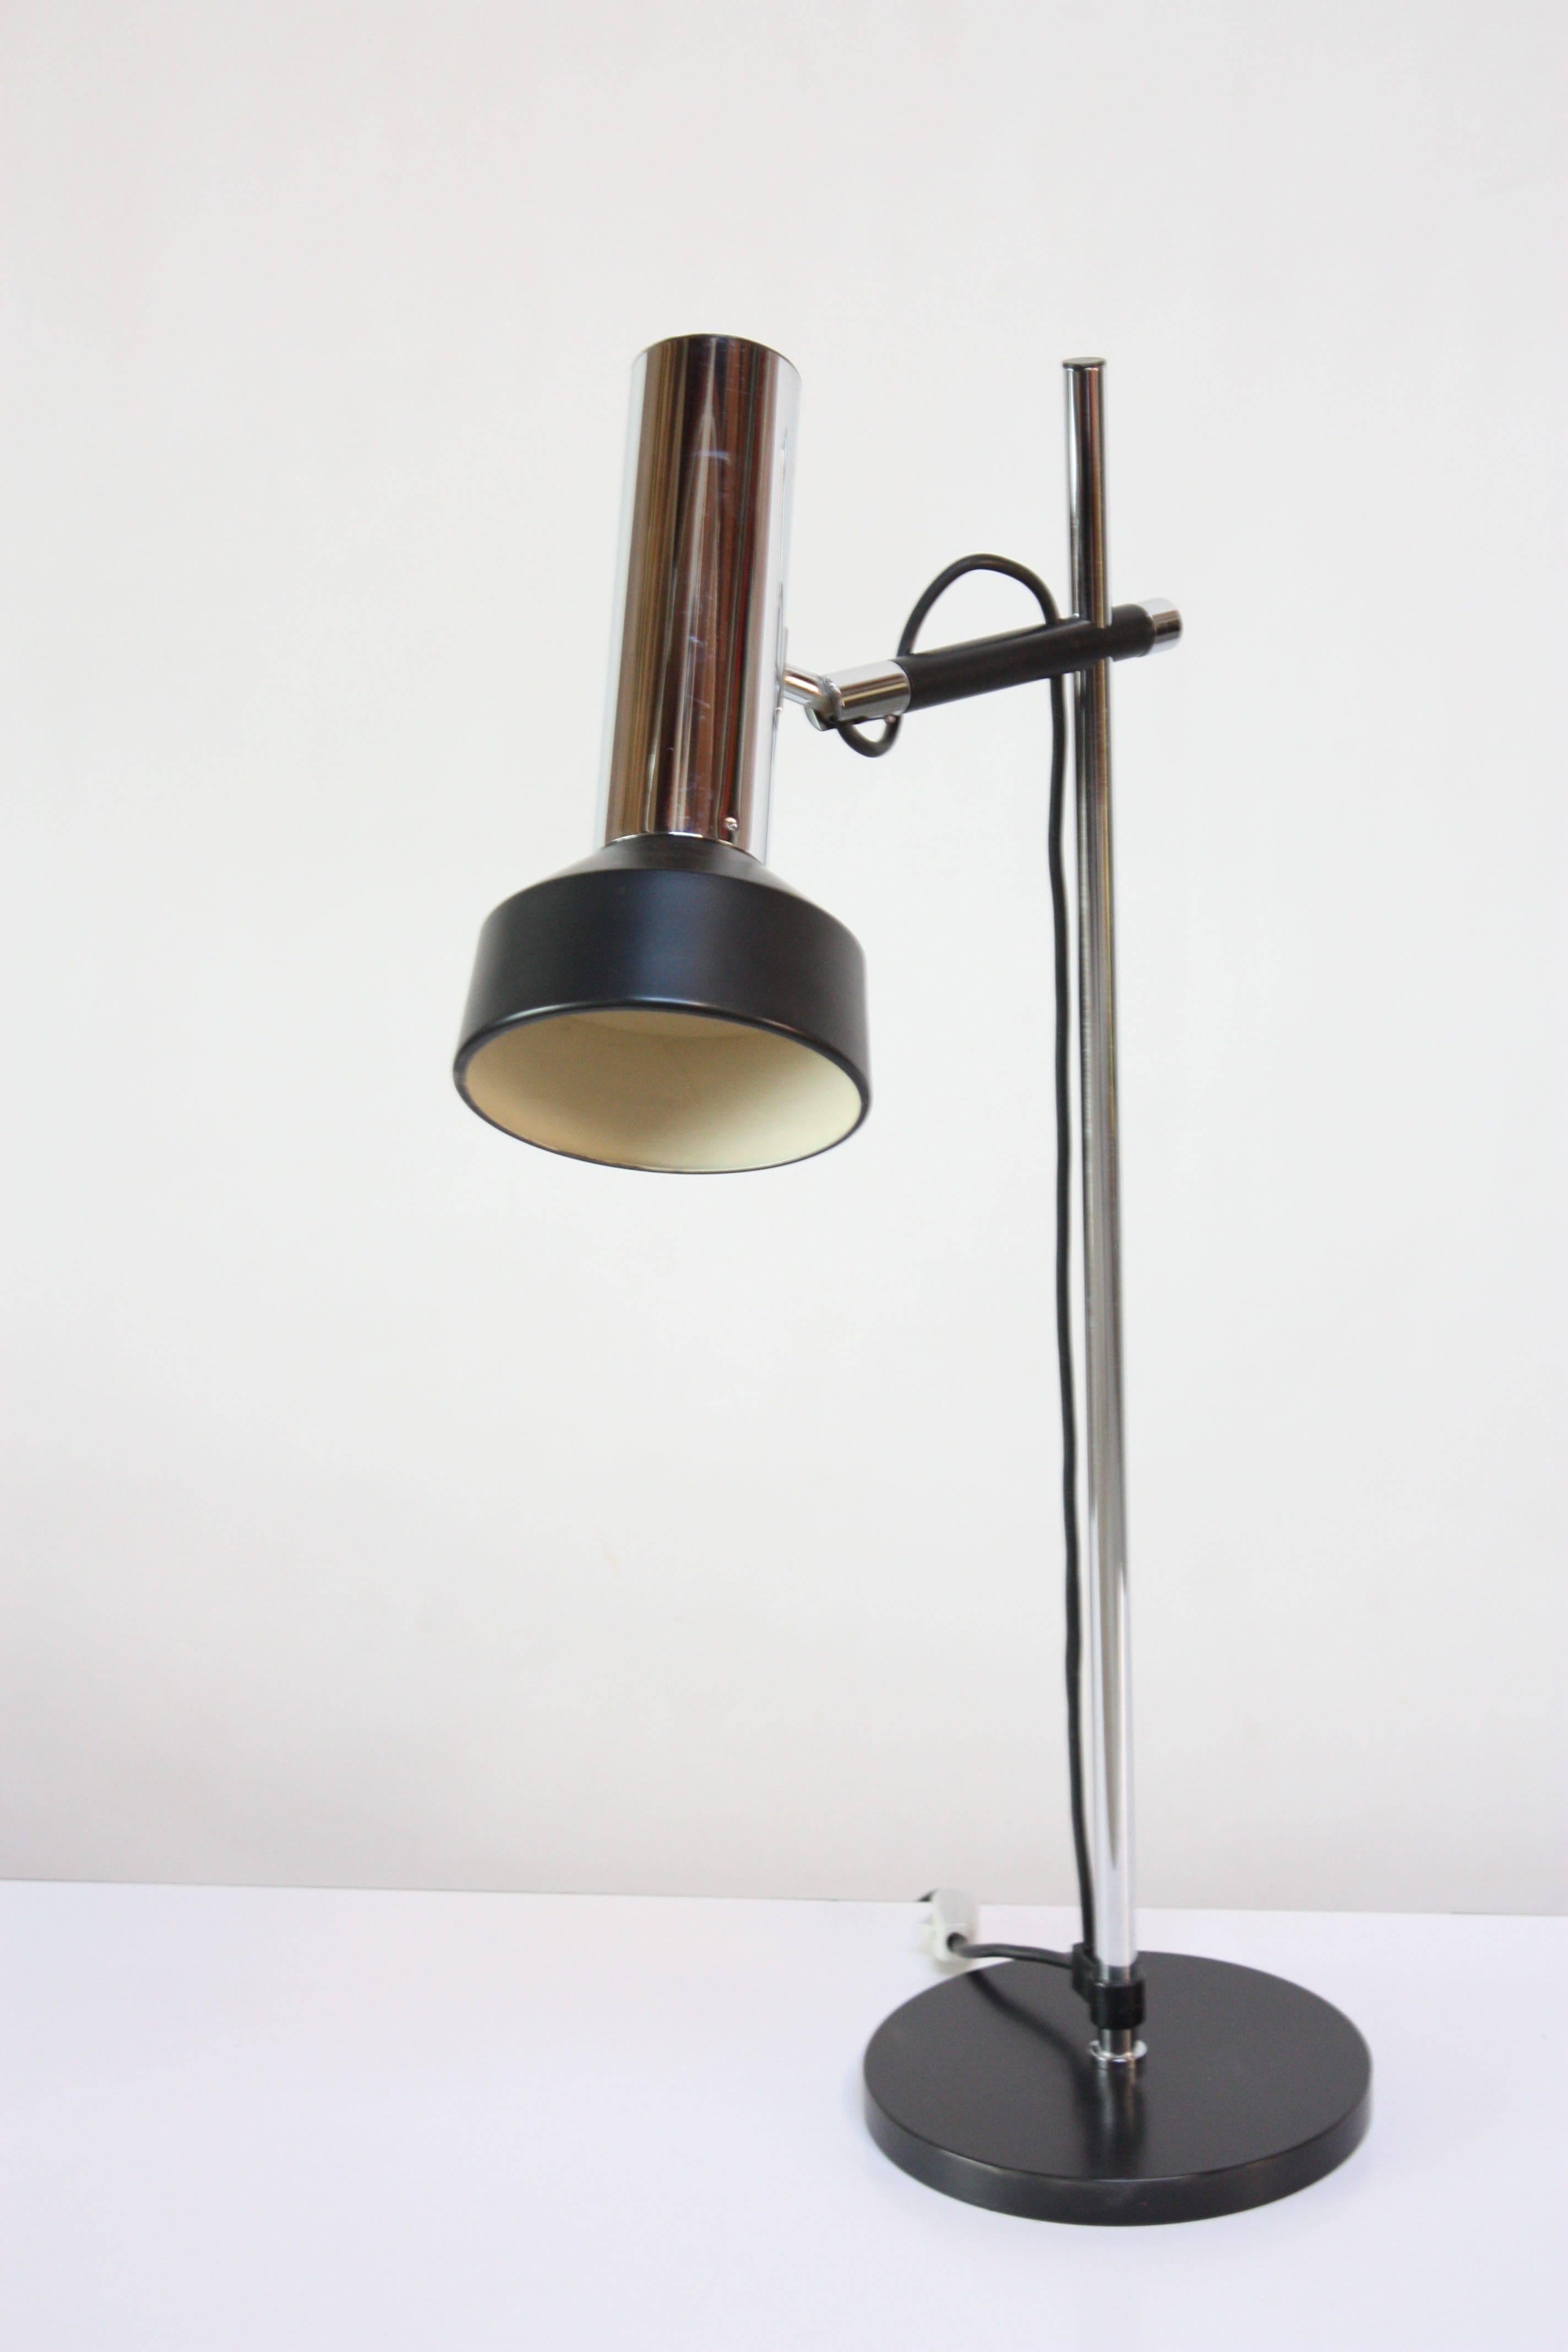 Beautifully designed, yet practical Danish table / task lamp composed of a chromed-metal stem / partial shade and a circular, black painted metal base and shade. Features a black metal clasp at the bottom to hold the cord in place along with a black